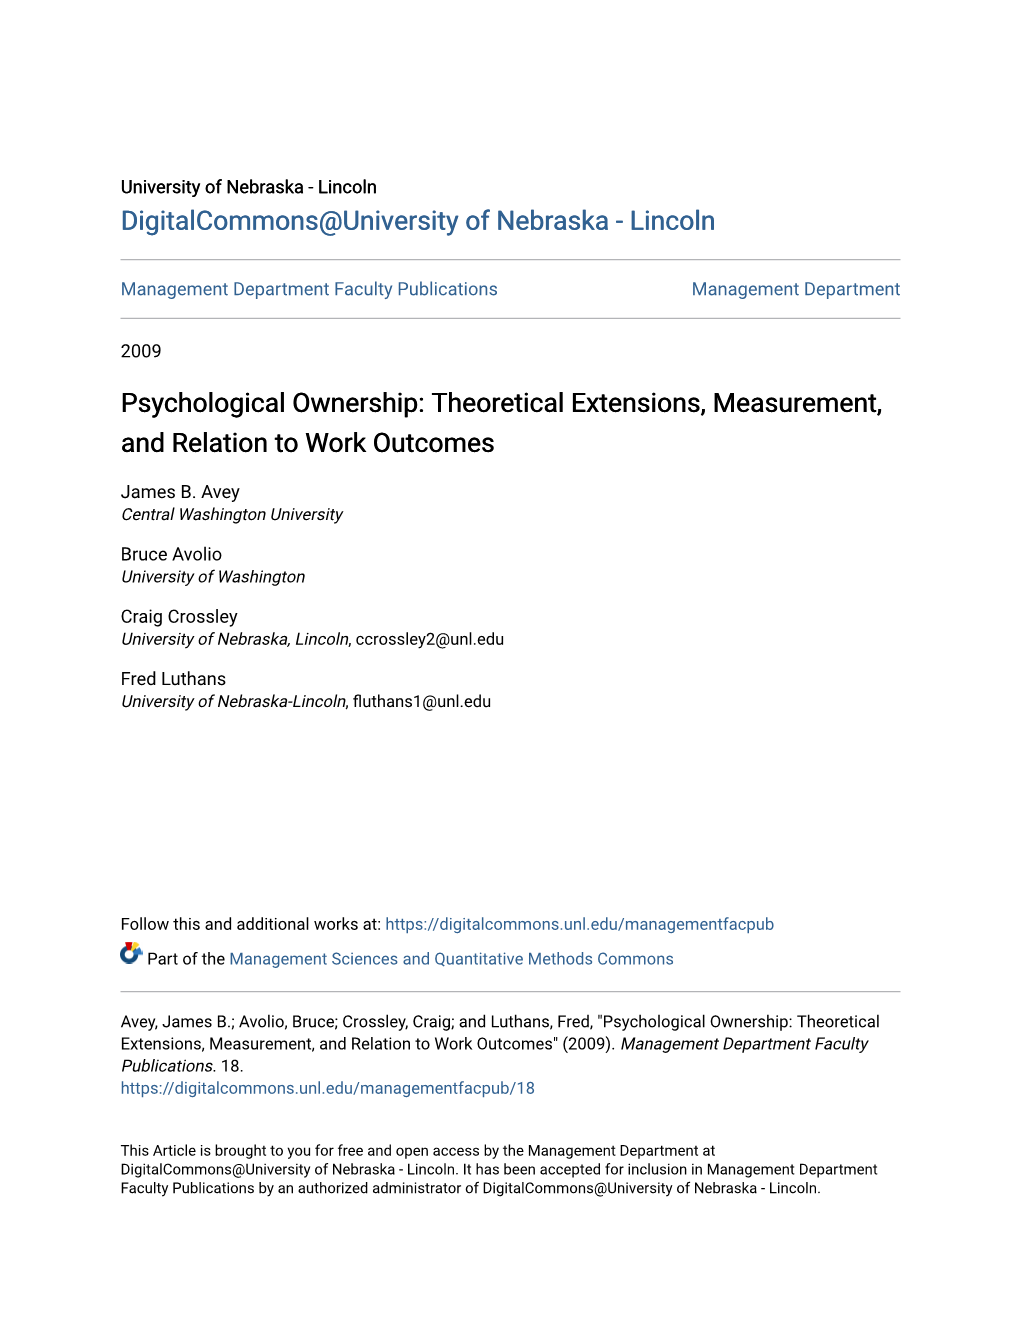 Psychological Ownership: Theoretical Extensions, Measurement, and Relation to Work Outcomes